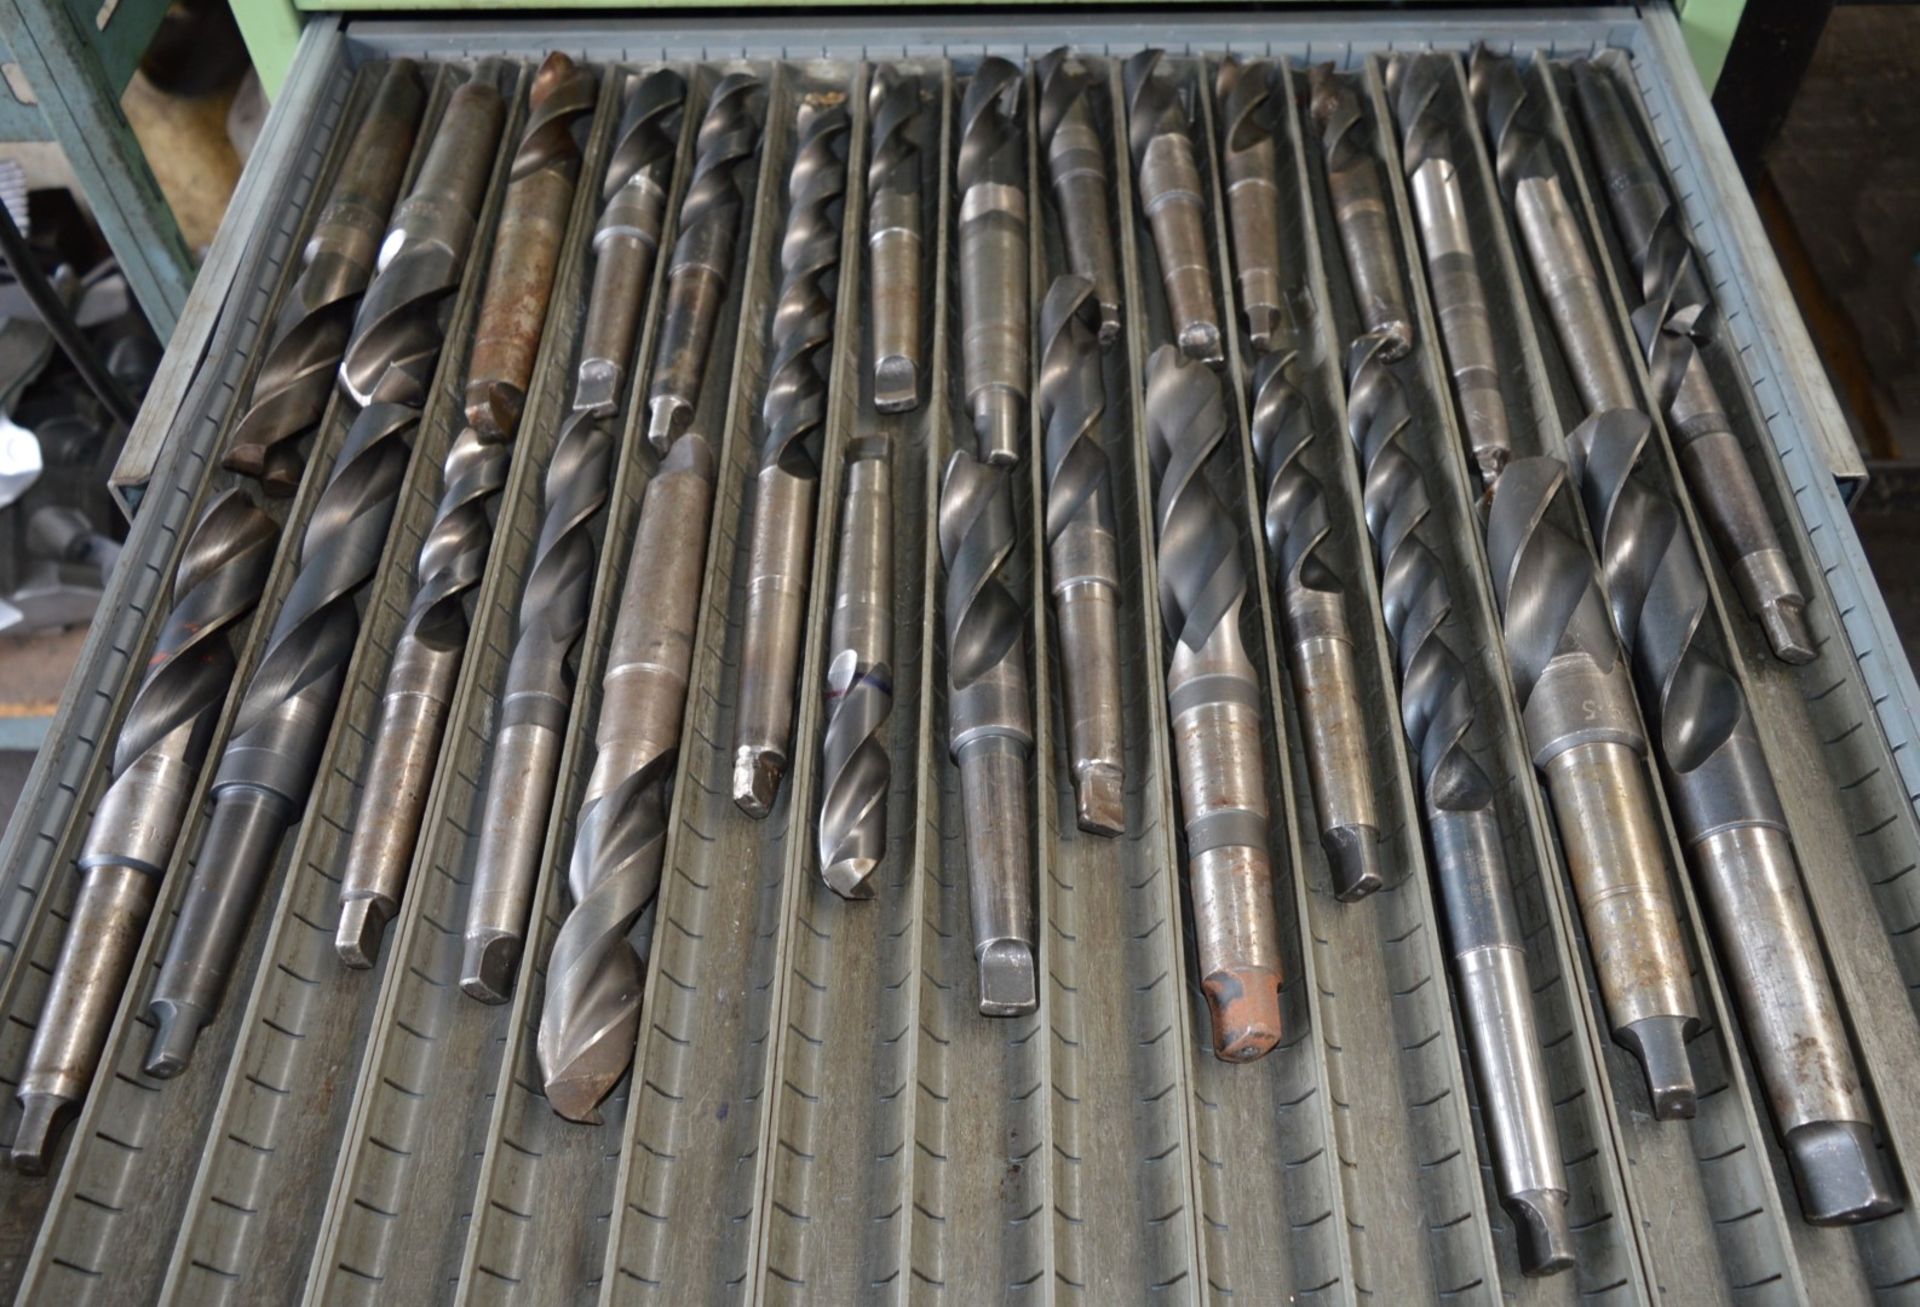 1 x Assorted Lot of Machine Drill Bits - Information to Follow - Please See Pictures Provided -